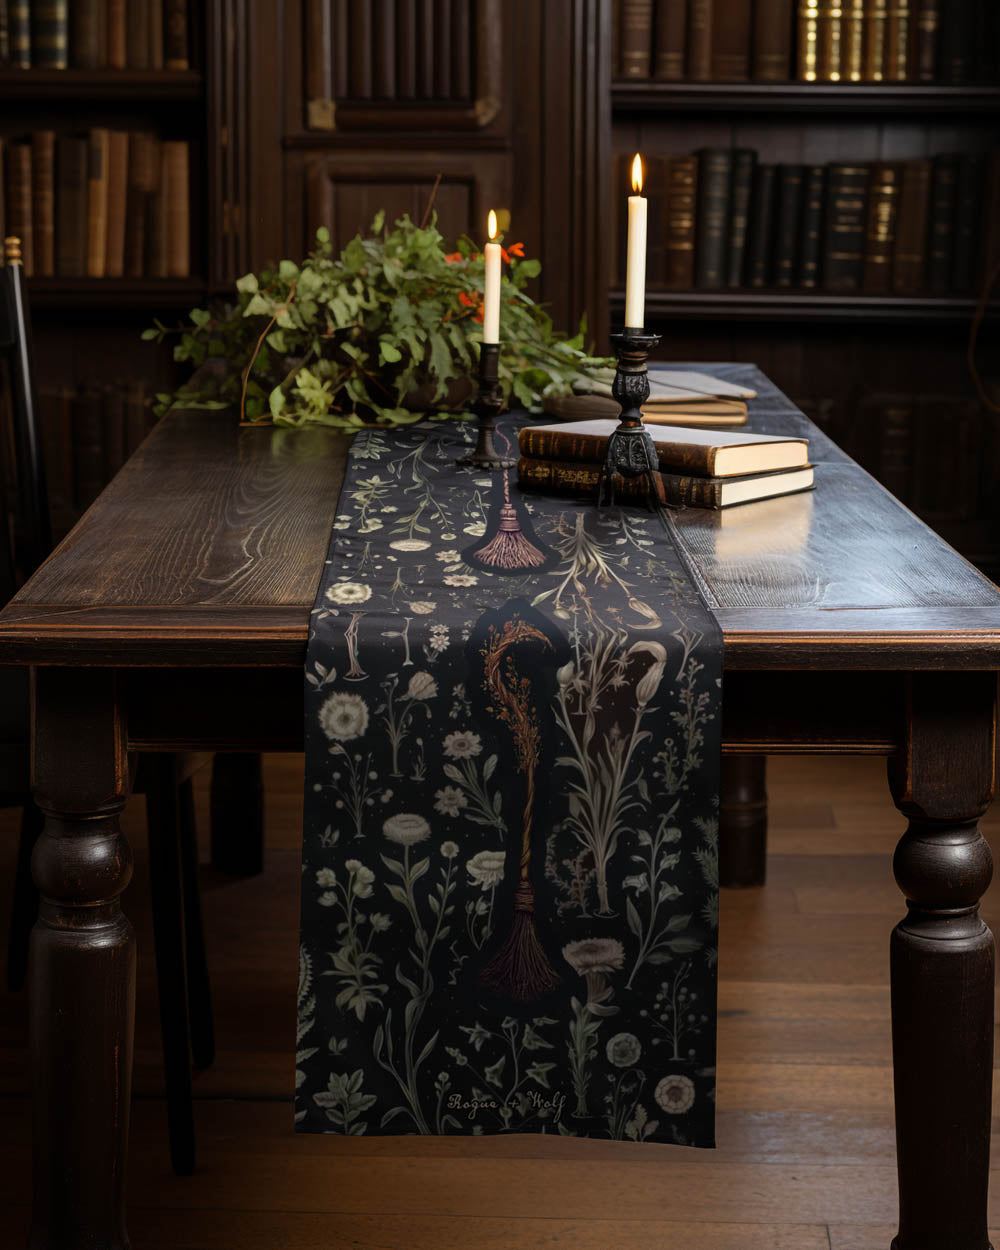 Witches' Broomsticks Table Runner - Botanical Witchy Home Decor - Goth Dinner Table Setup - Gothic Kitchen Room Decor